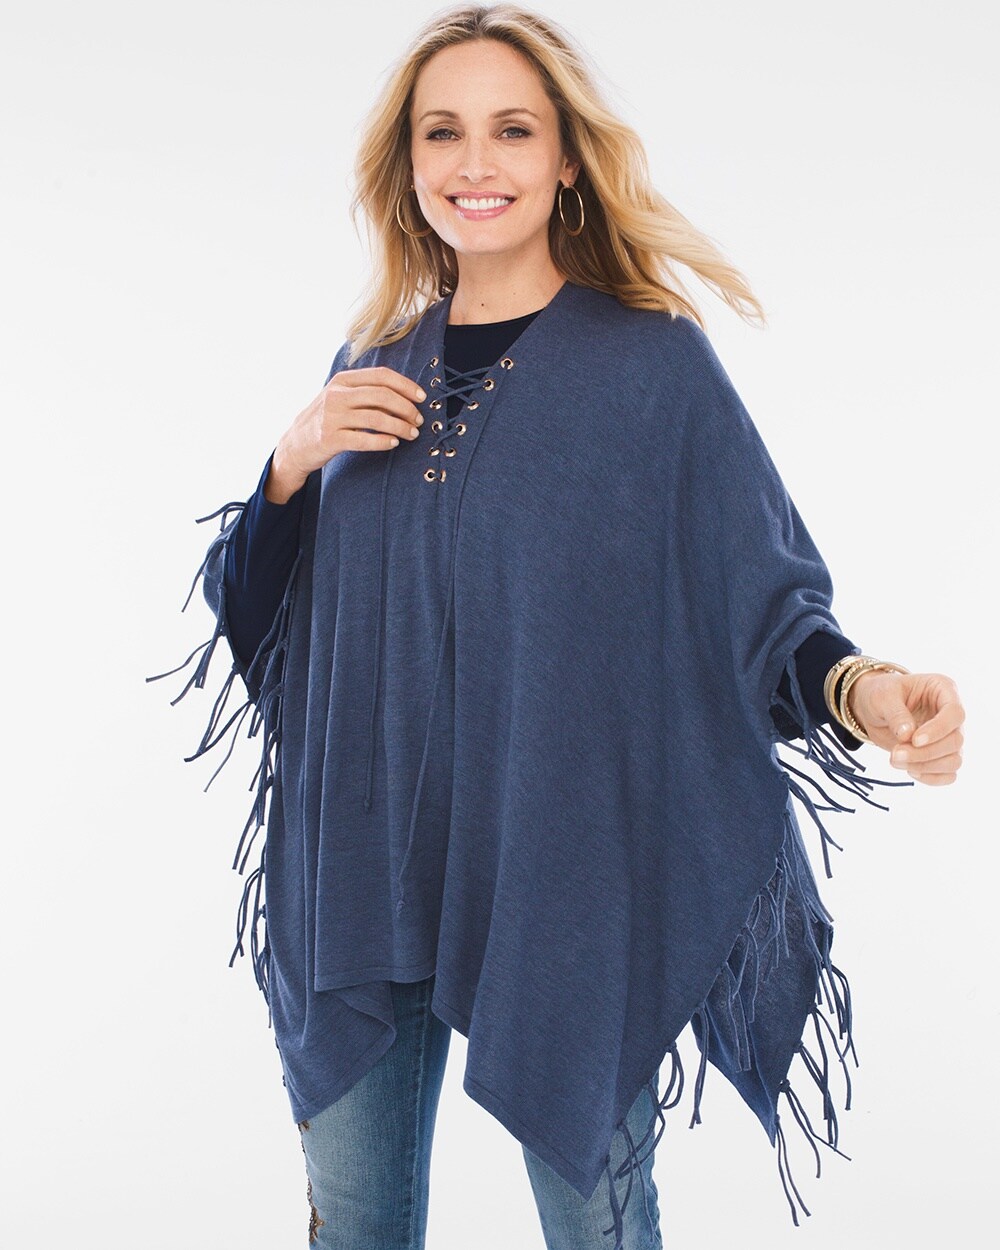 Lace-Up Fringe Poncho in Navy